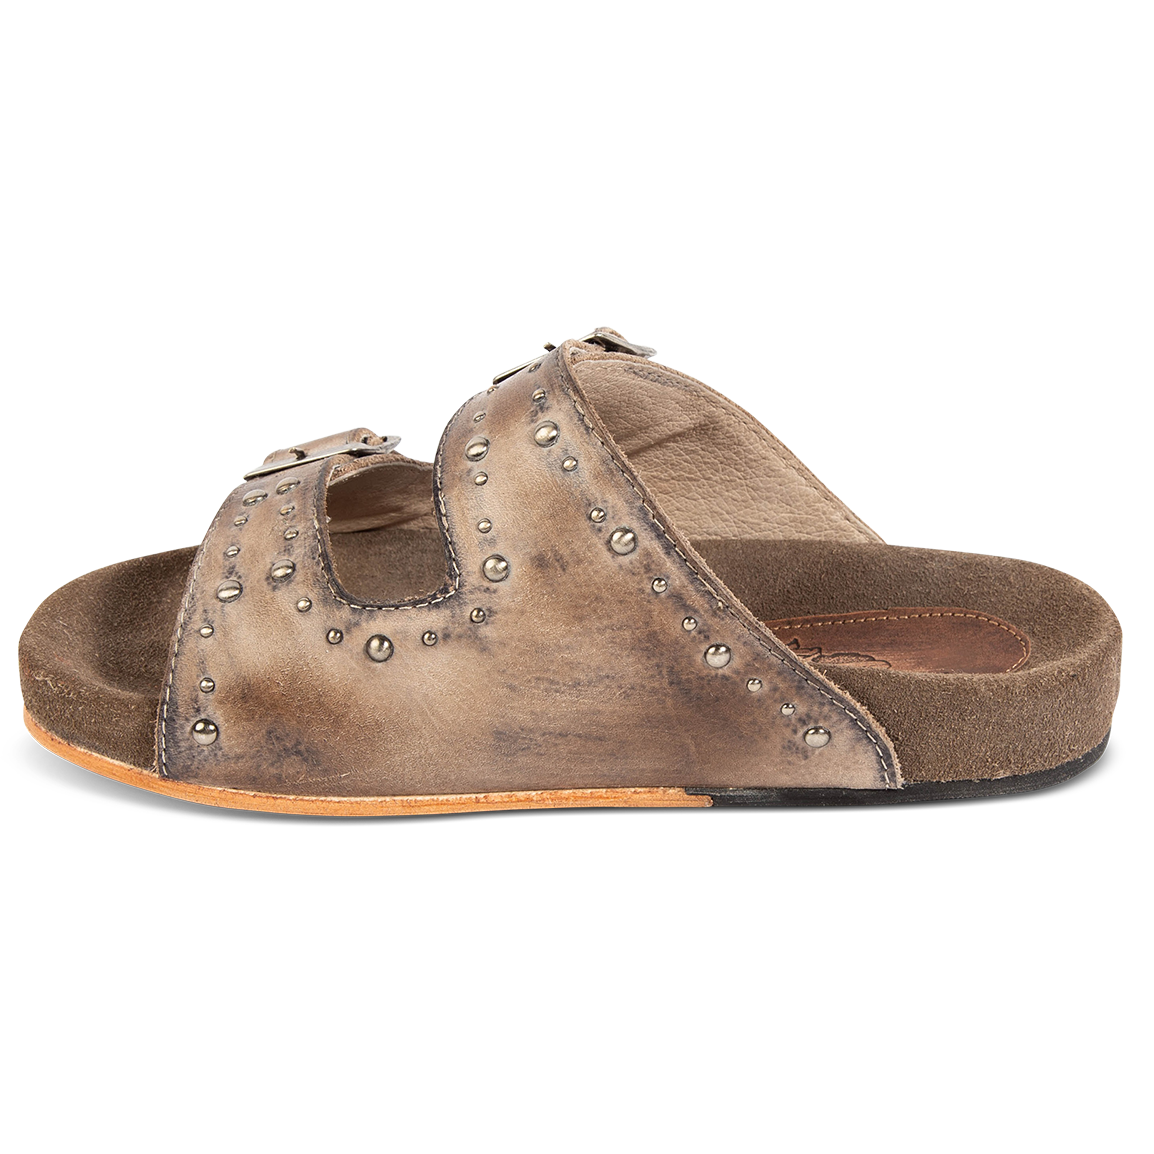 Inside view showing FREEBIRD women's Asher stone sandal with adjustable belt buckles, a suede footbed and silver embellishments